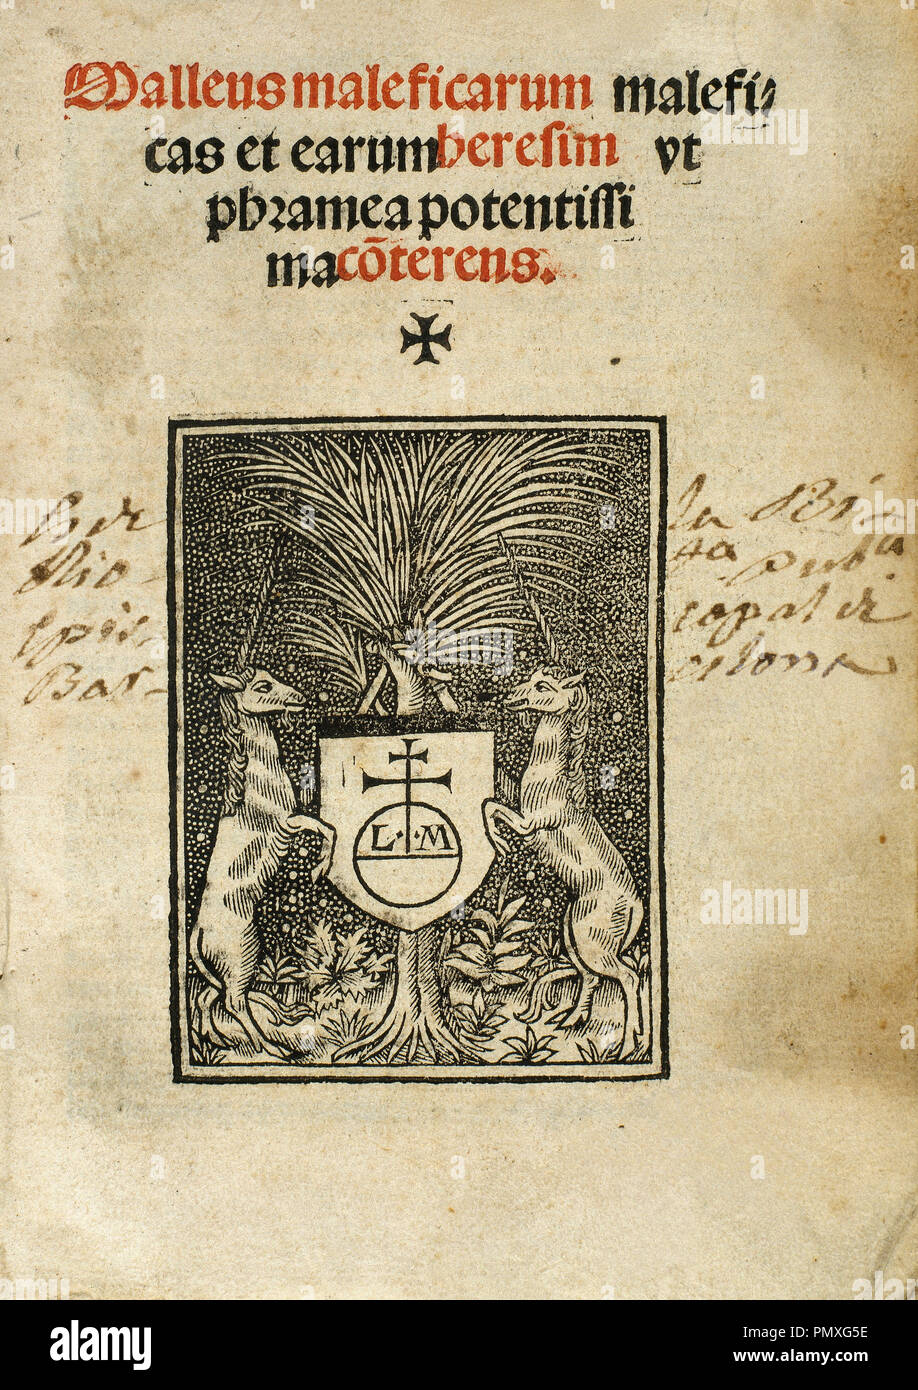 Malleus Maleficarum (1487), written by German churchman and inquisitor Heinrich Kramer or Henricus Institor (c.1430-1505). It describes witchcraft and processes for the extermination of witches, he was instrumental in establishing the period of witch trials in the early modern period. Cover page. Printed in Lyon, 1519 by Joannem Masson. Private Collection. Stock Photo